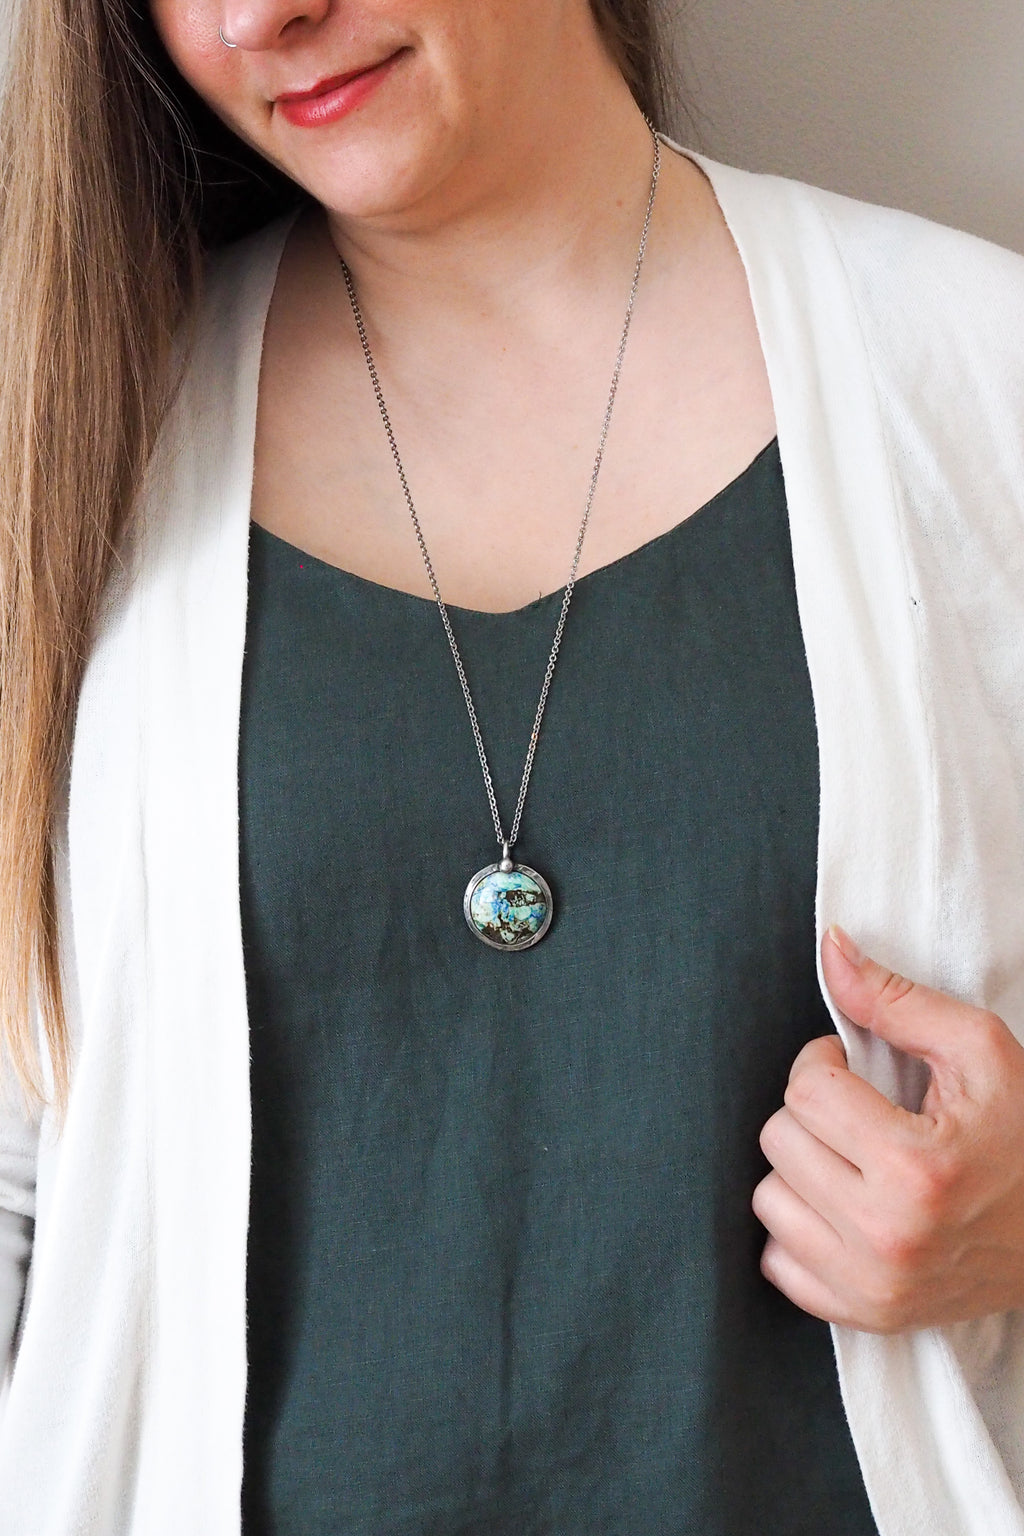 blue and green mixed gemstone healing crystal talisman statement necklace on woman in blue top with white cardigan